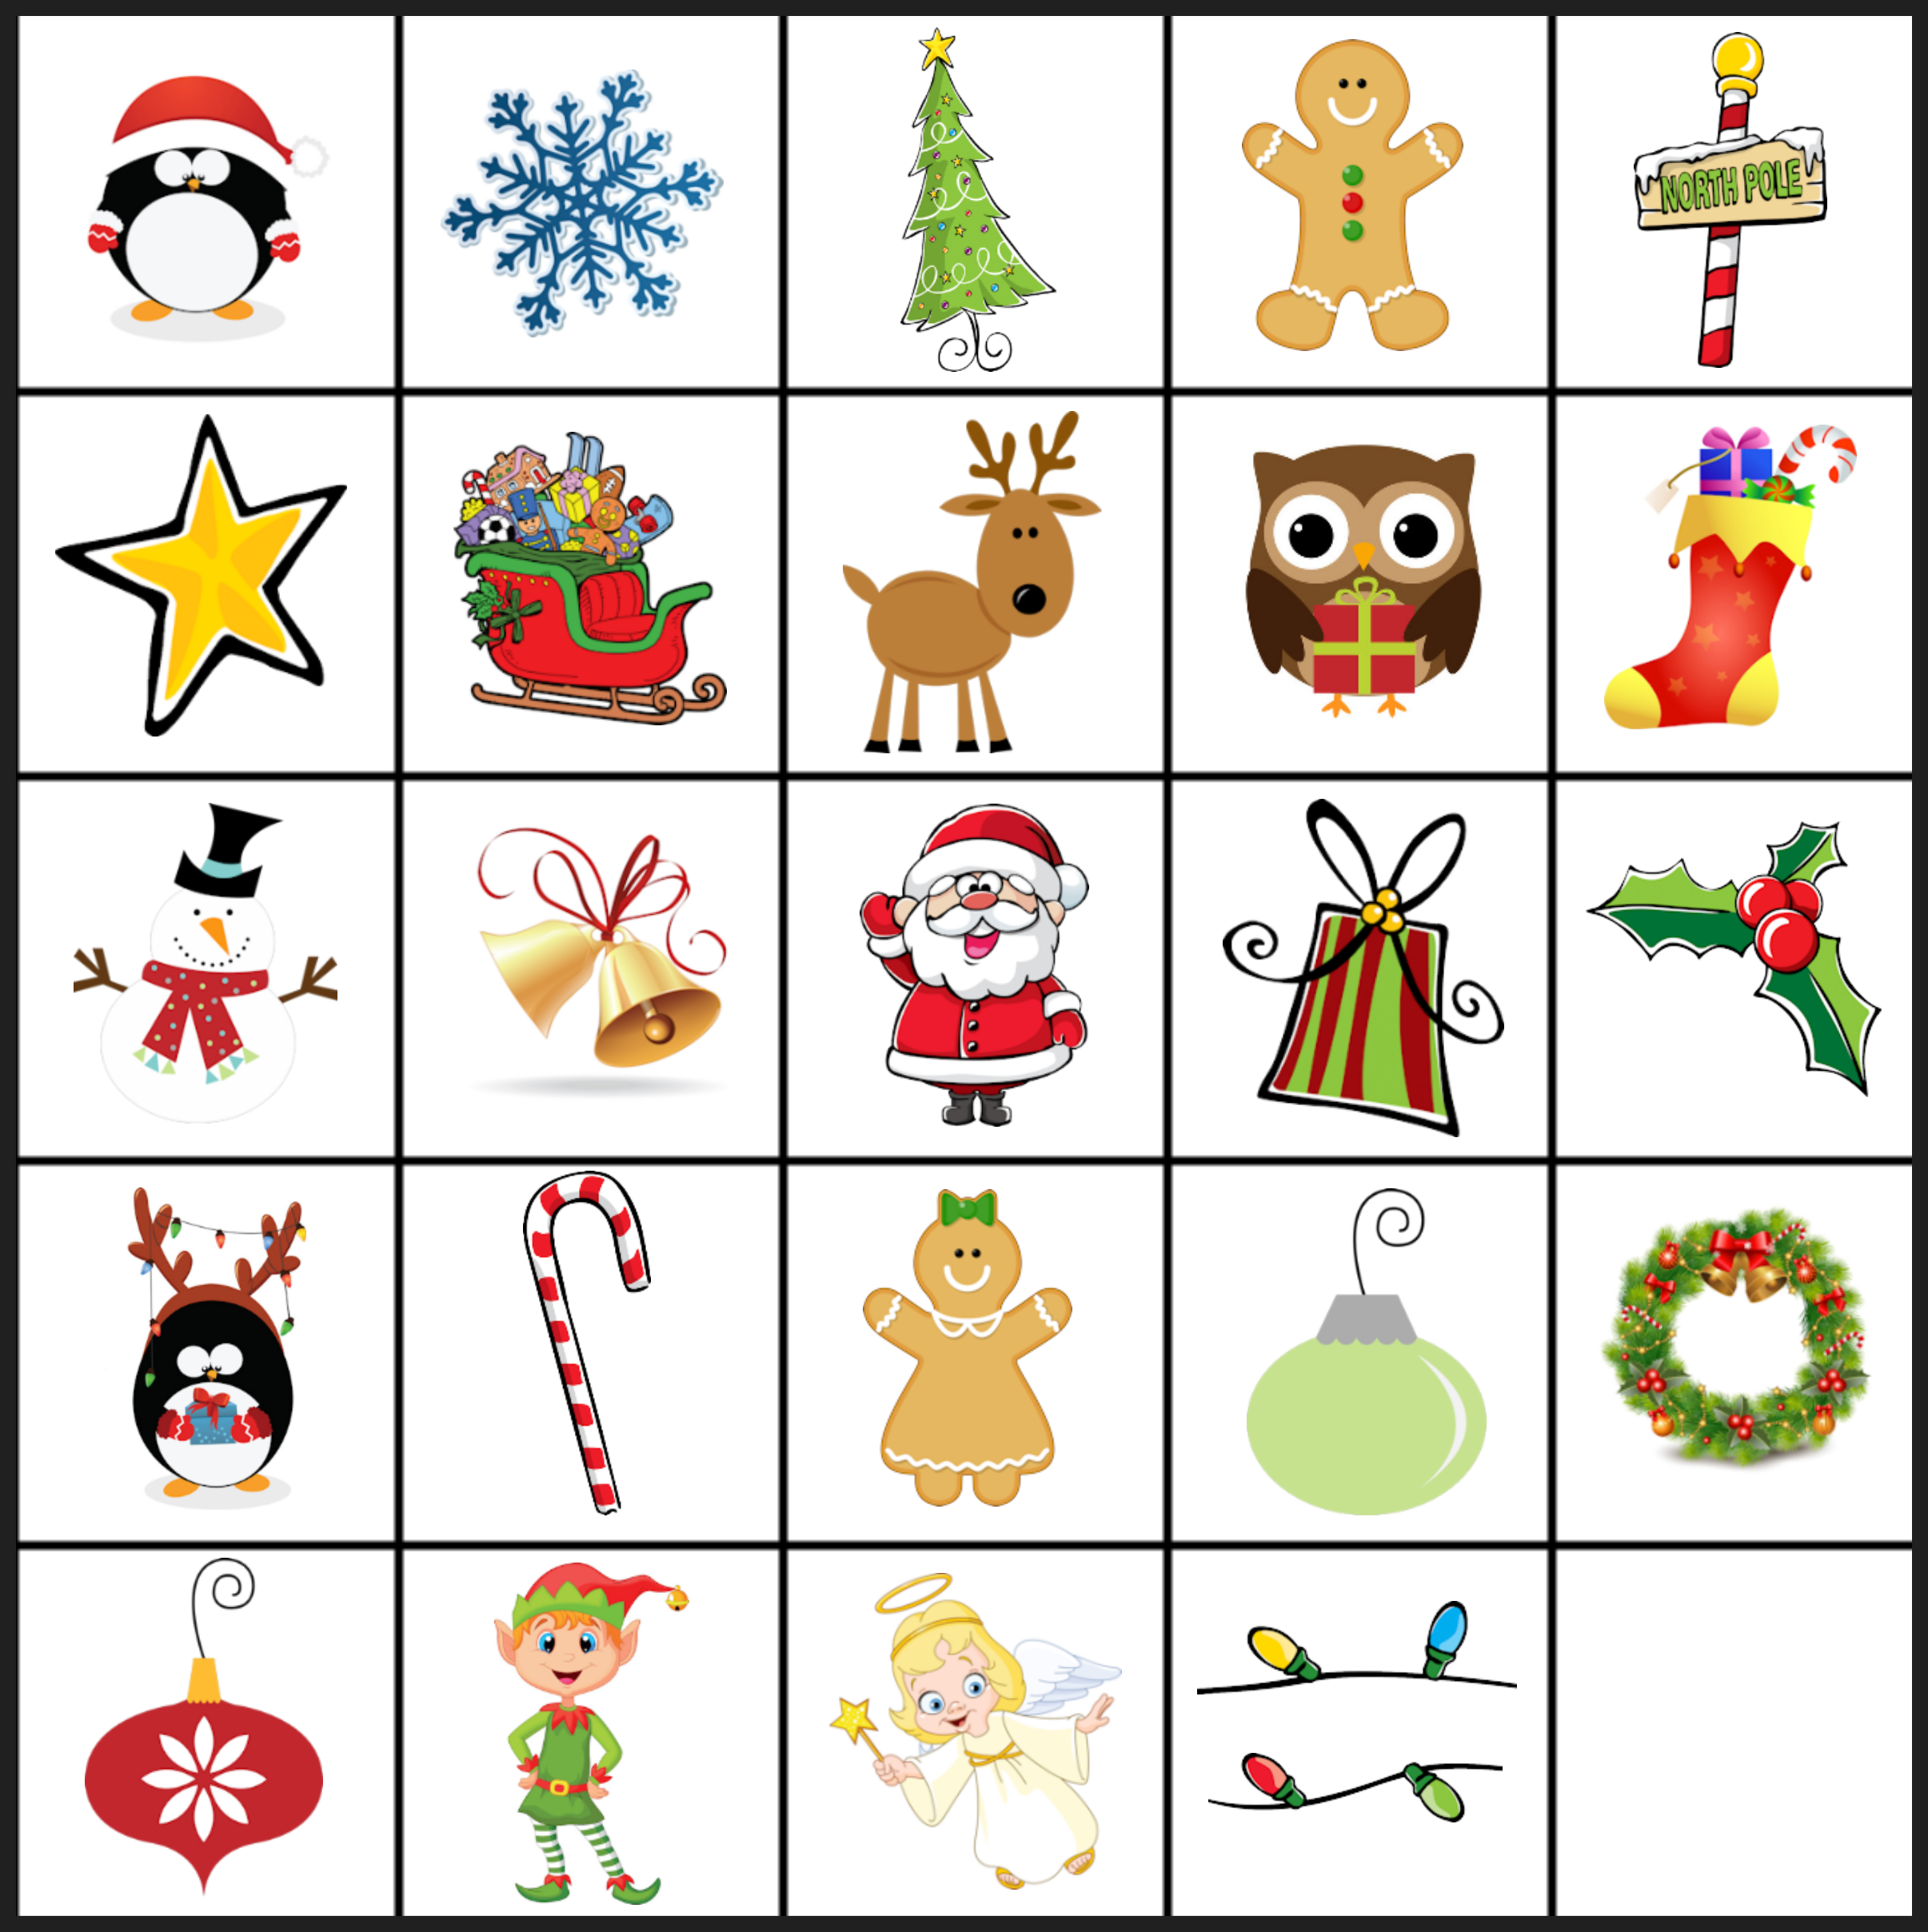 7 Best Images of Winter Card Printable Matching Games  Printable Memory Game Cards, Christmas 